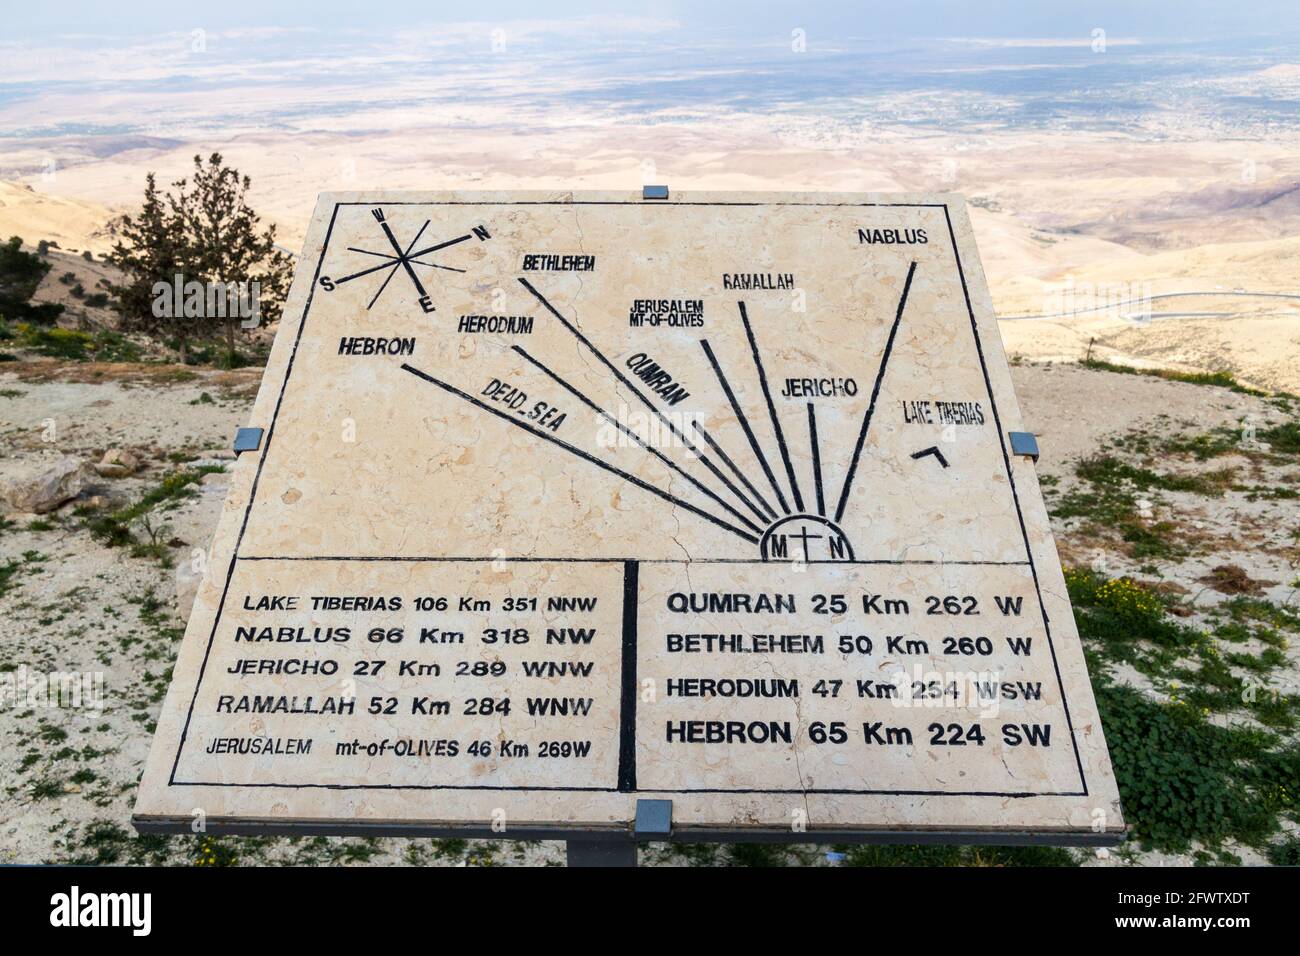 View of the Holy Land from Mount Nebo showing important places, Jordan Stock Photo